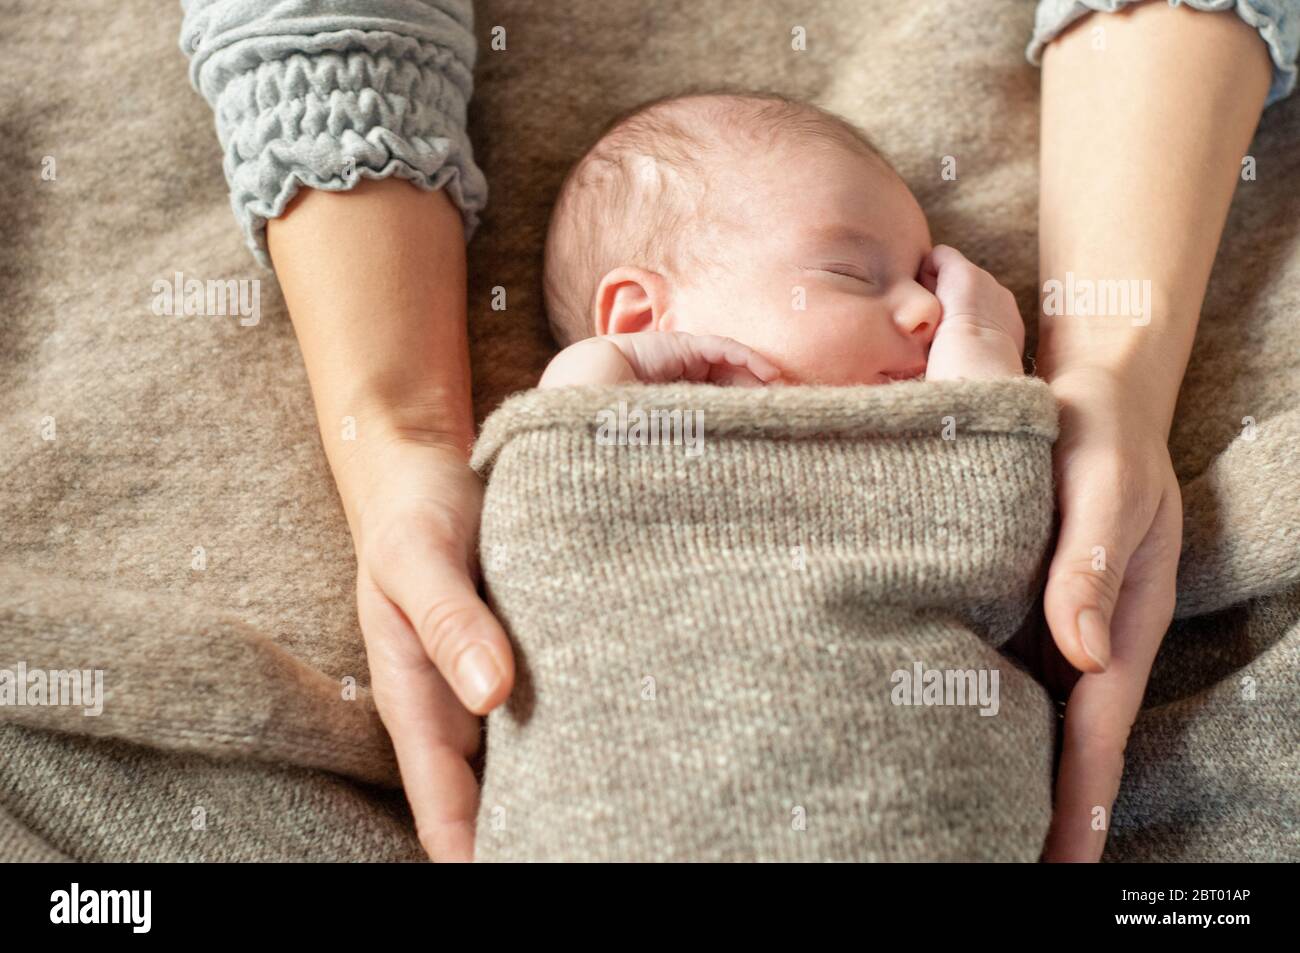 A four week old baby swaddled in a brown blanket, being held by her mother, asleep. Stock Photo